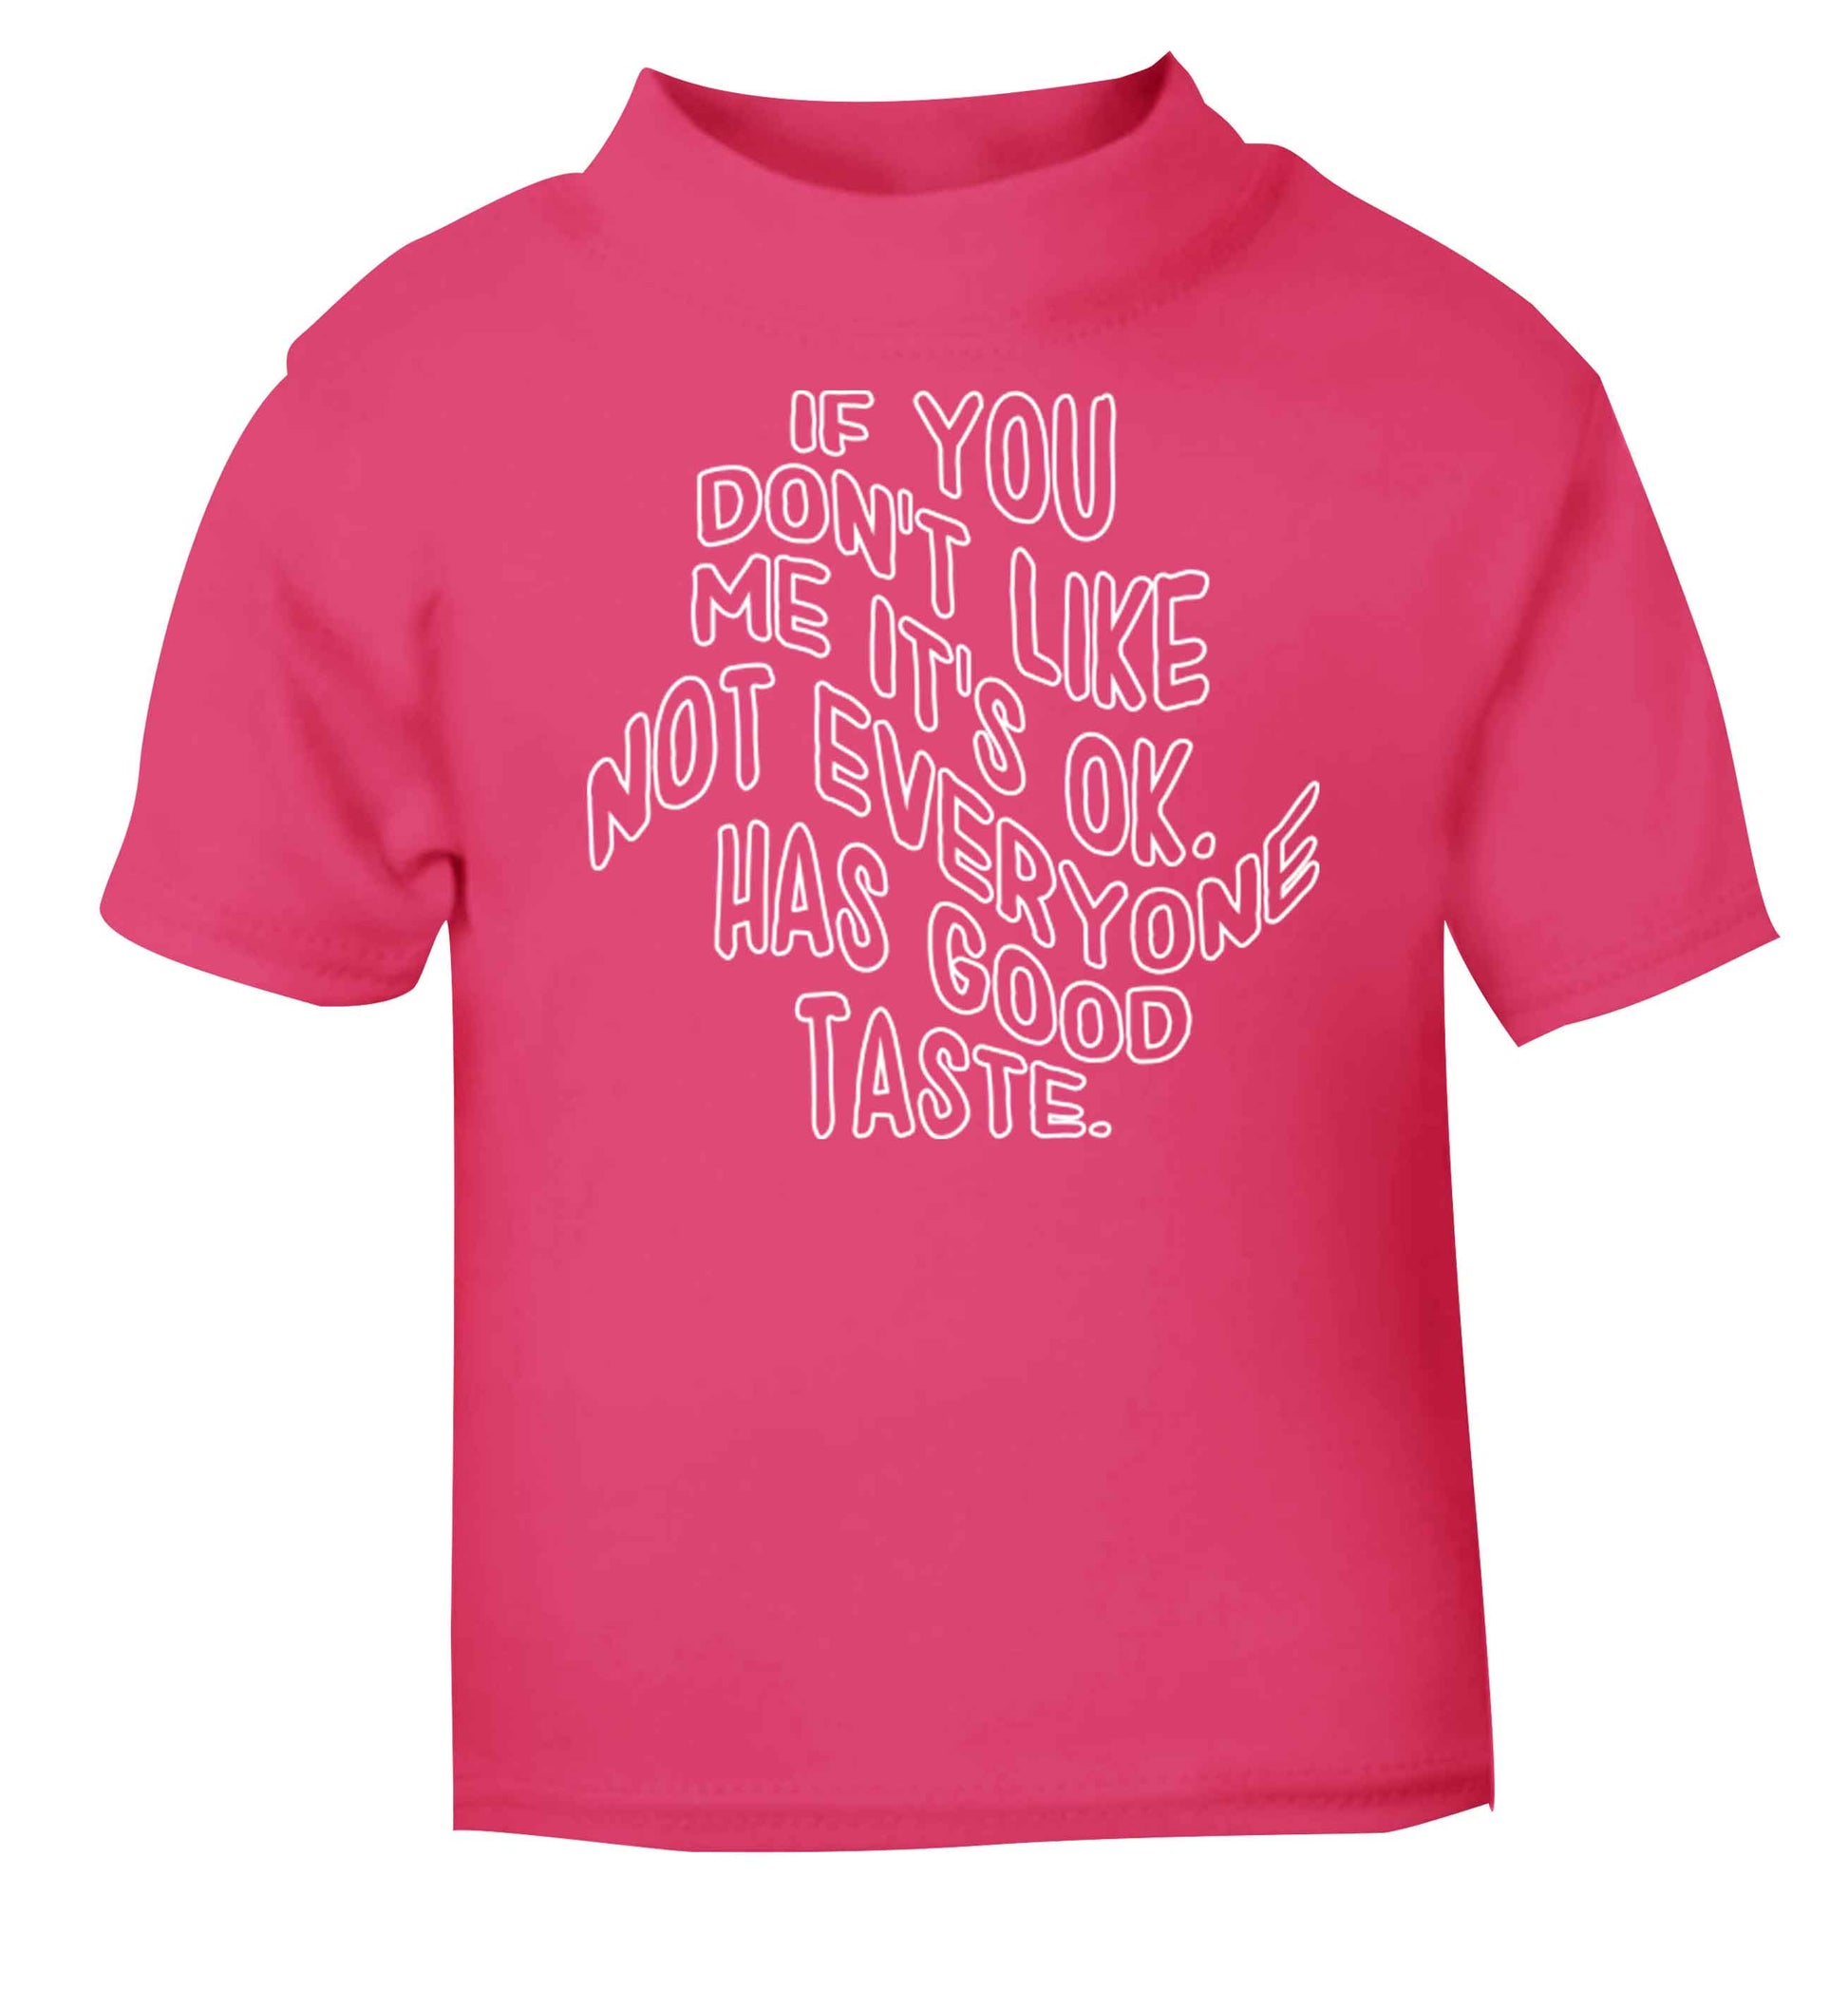 If you don't like me it's ok not everyone has good taste pink baby toddler Tshirt 2 Years